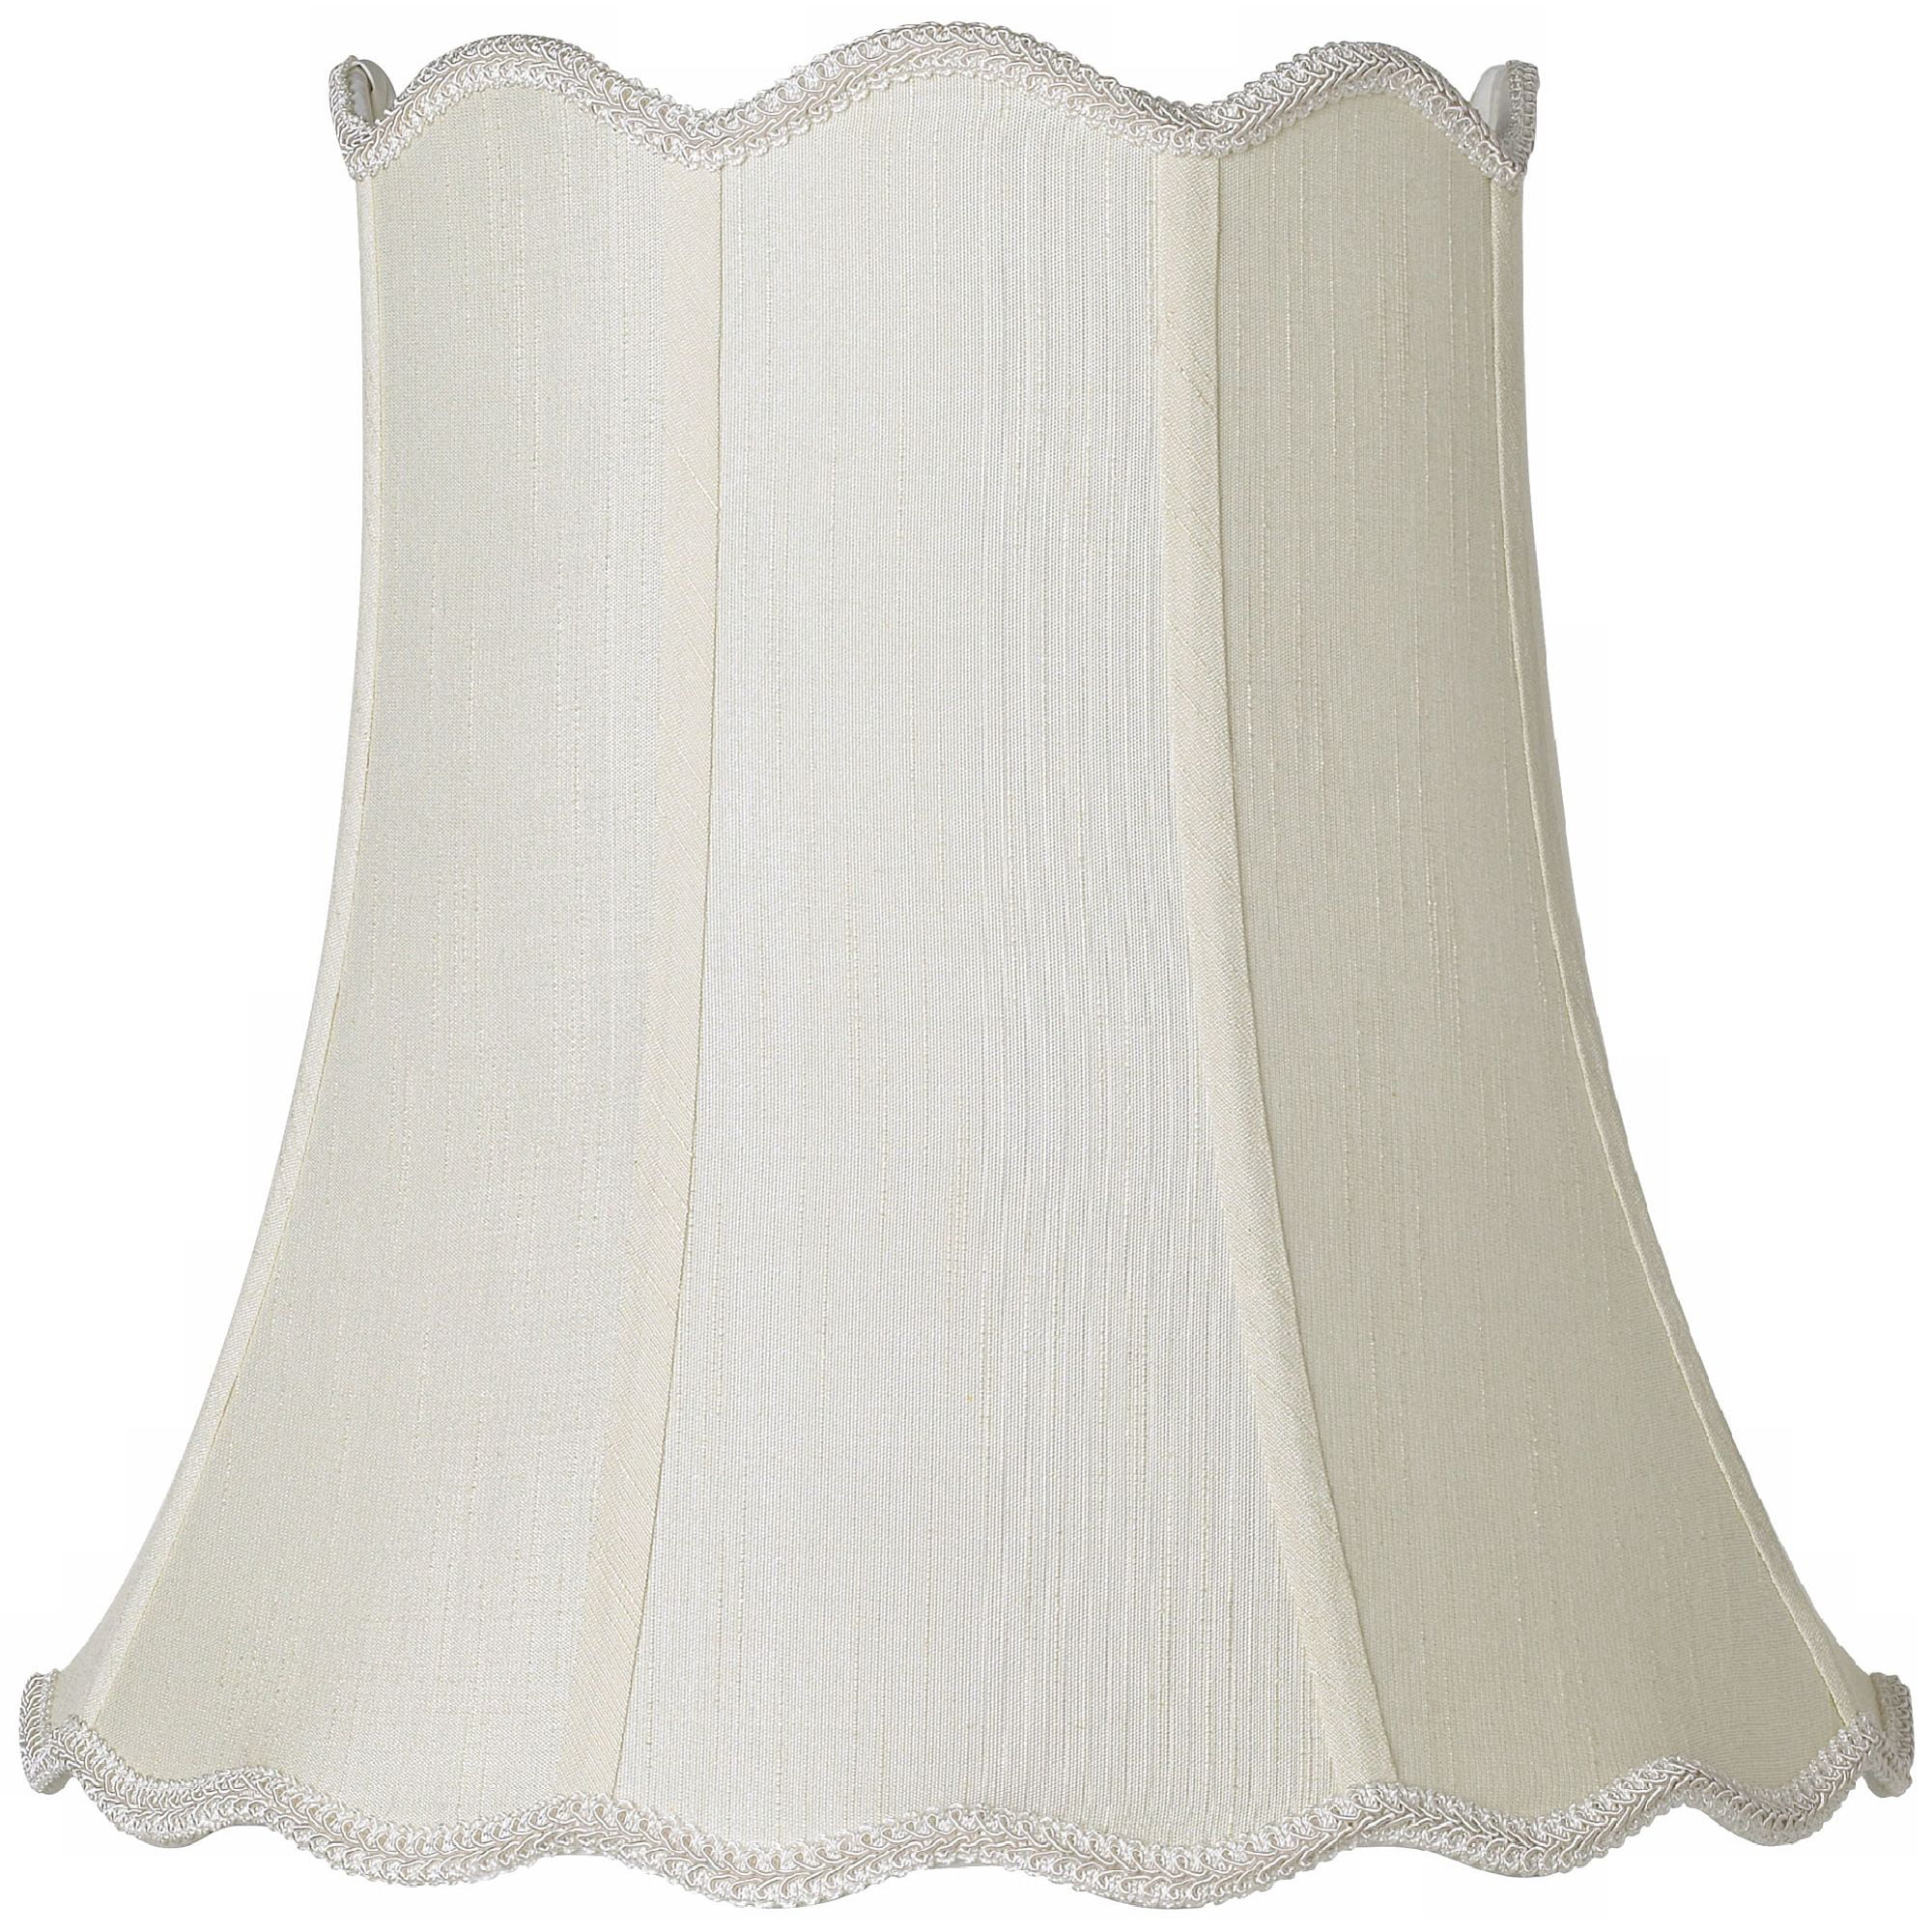 Imperial Shade Imperial Creme Scallop Bell Lamp Shade 10x16x15